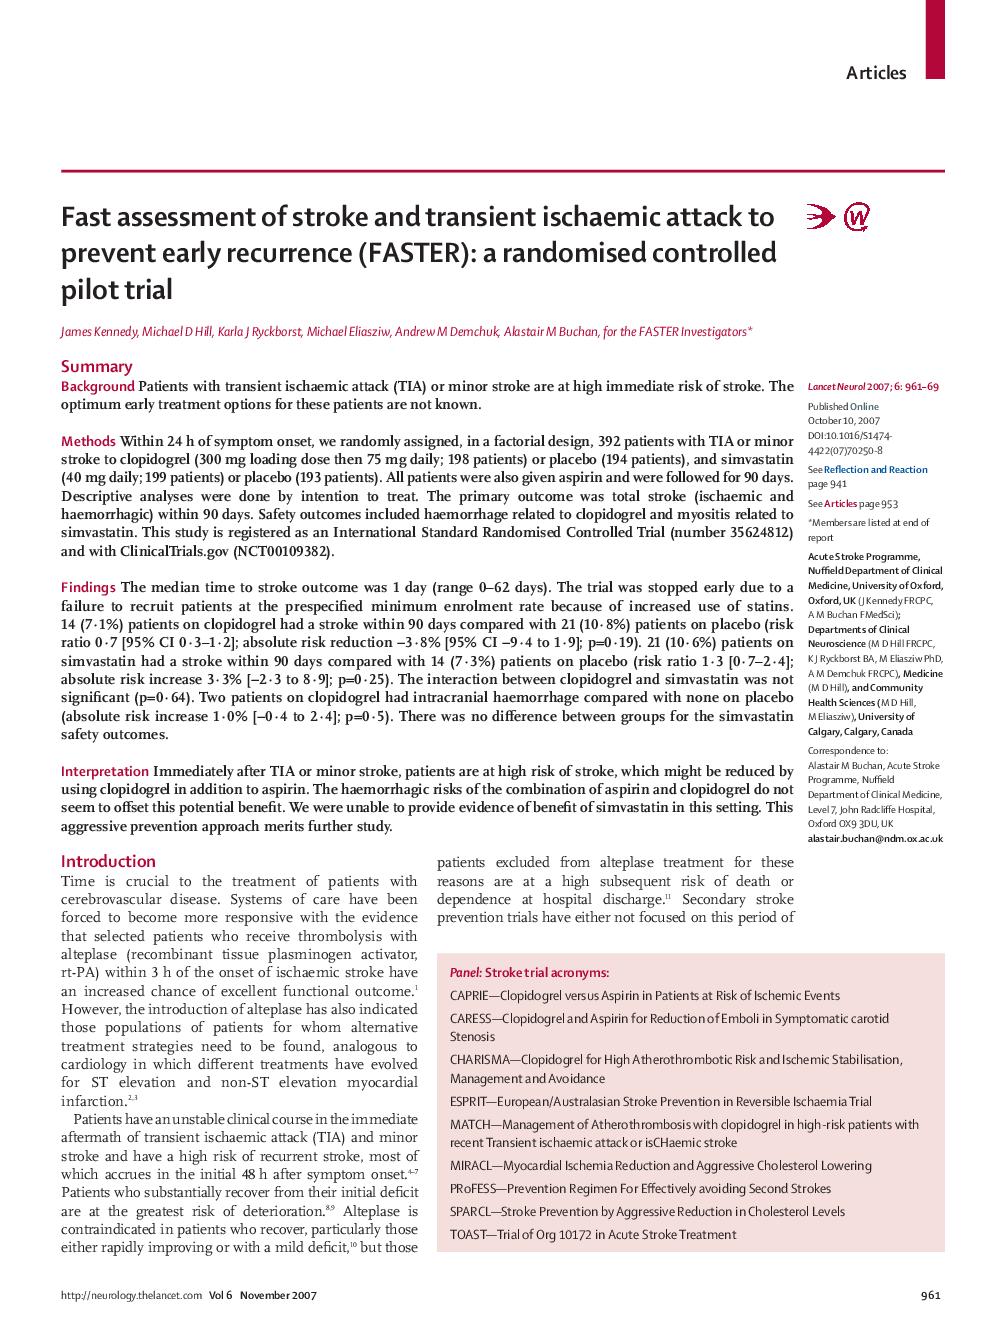 Fast assessment of stroke and transient ischaemic attack to prevent early recurrence (FASTER): a randomised controlled pilot trial